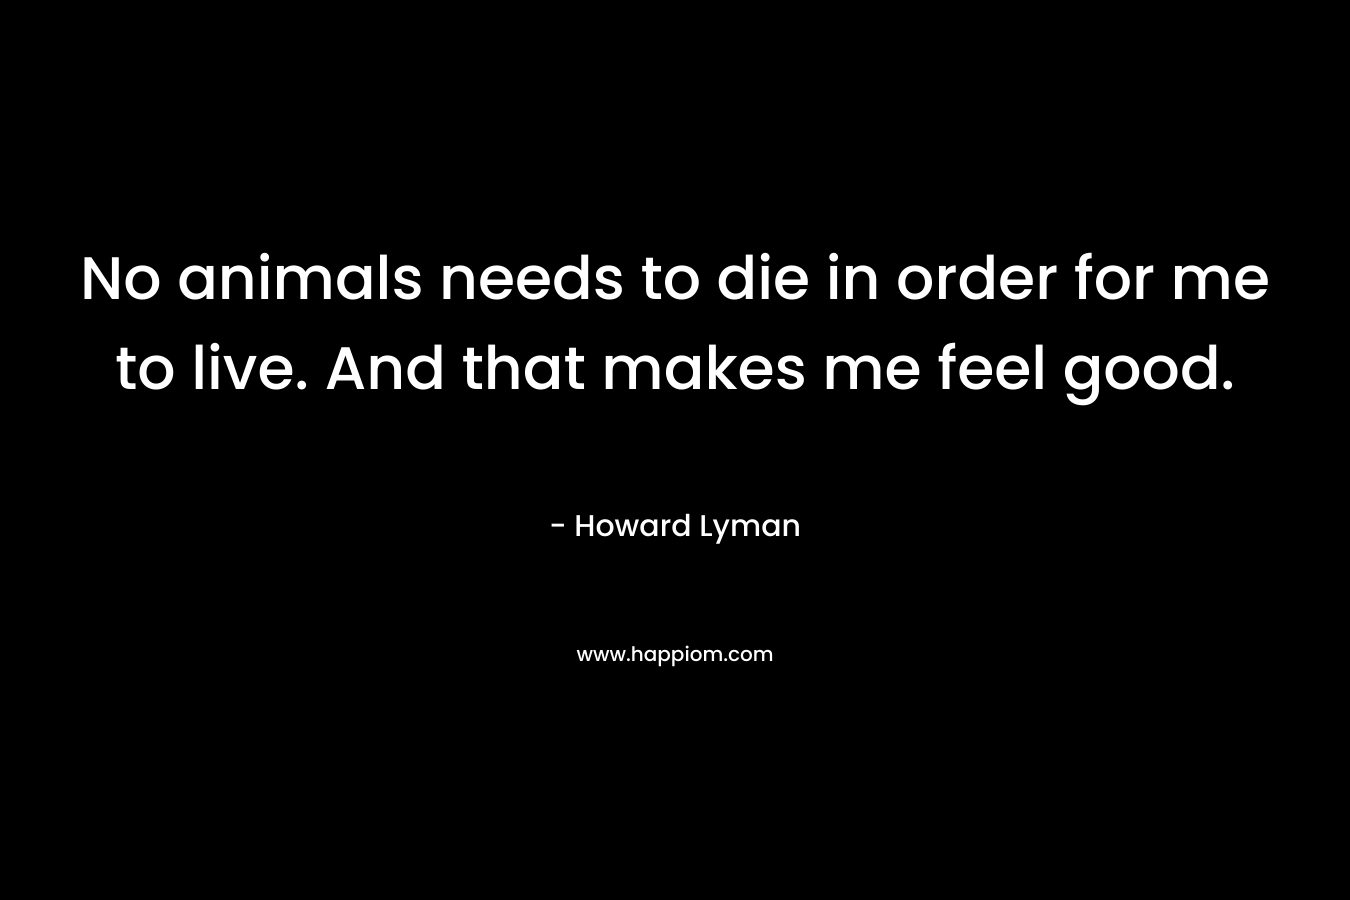 No animals needs to die in order for me to live. And that makes me feel good.